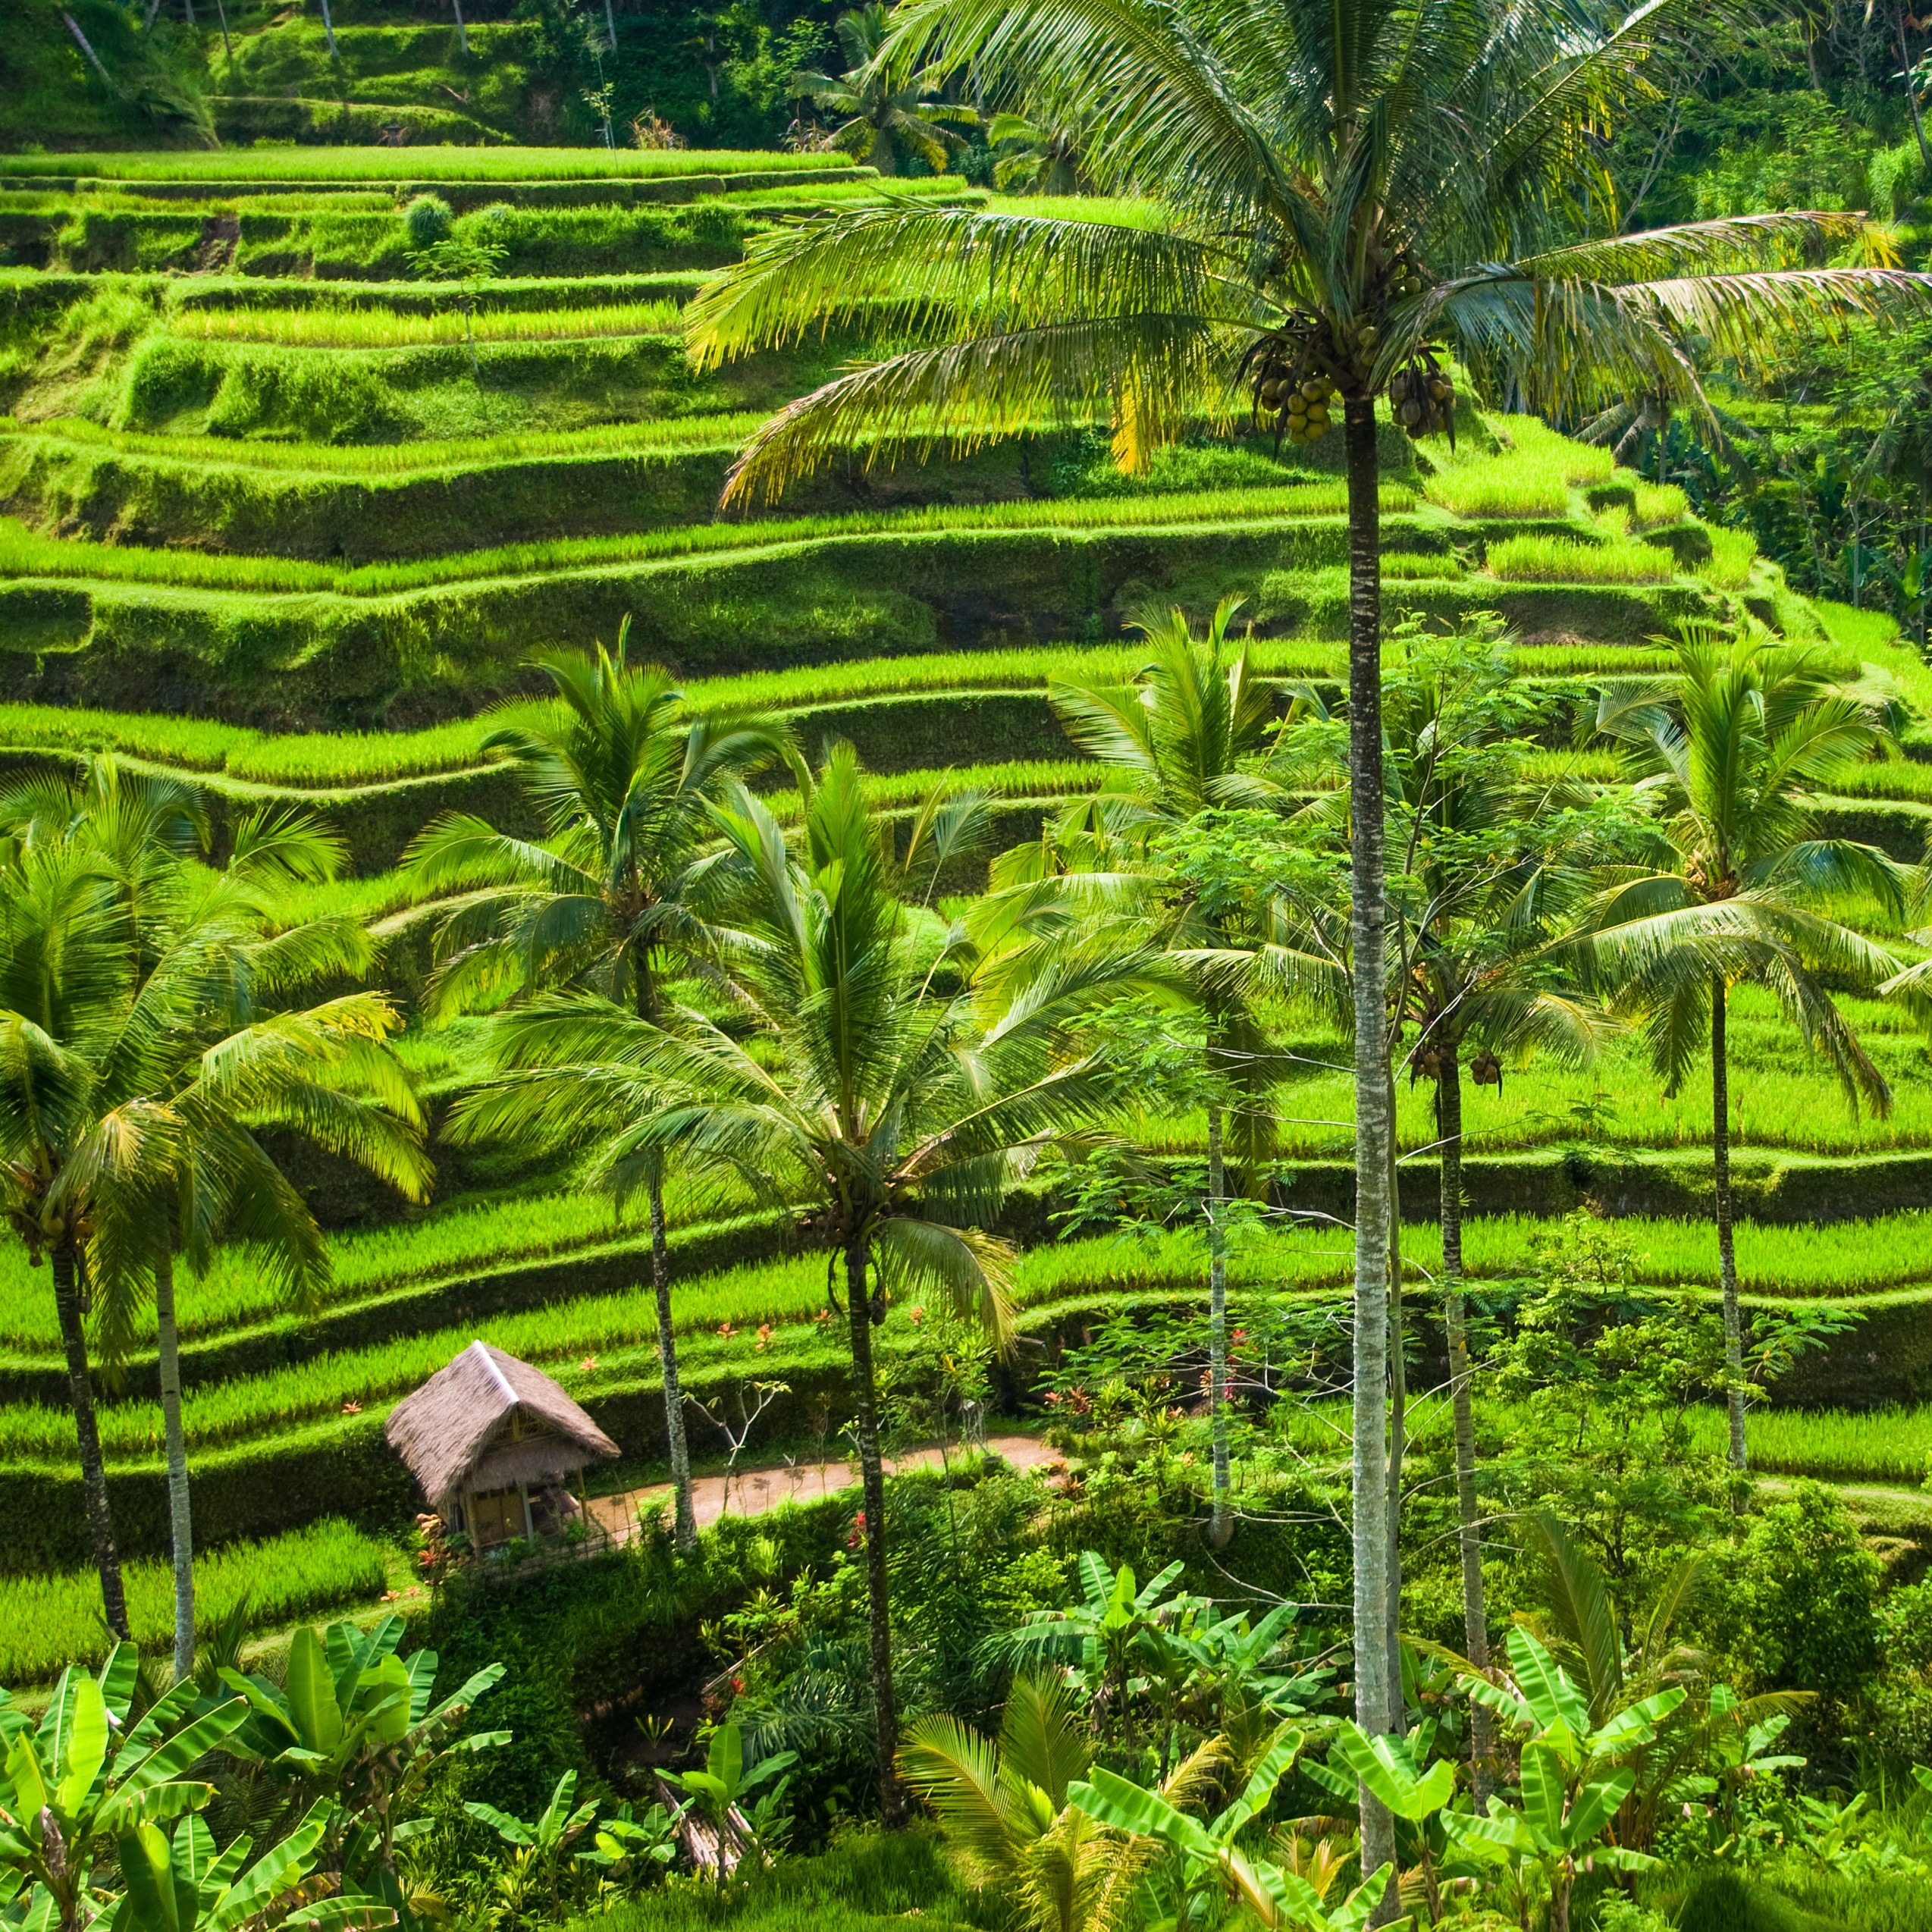 Bali’s Rice Culture: The Way of the Spirit